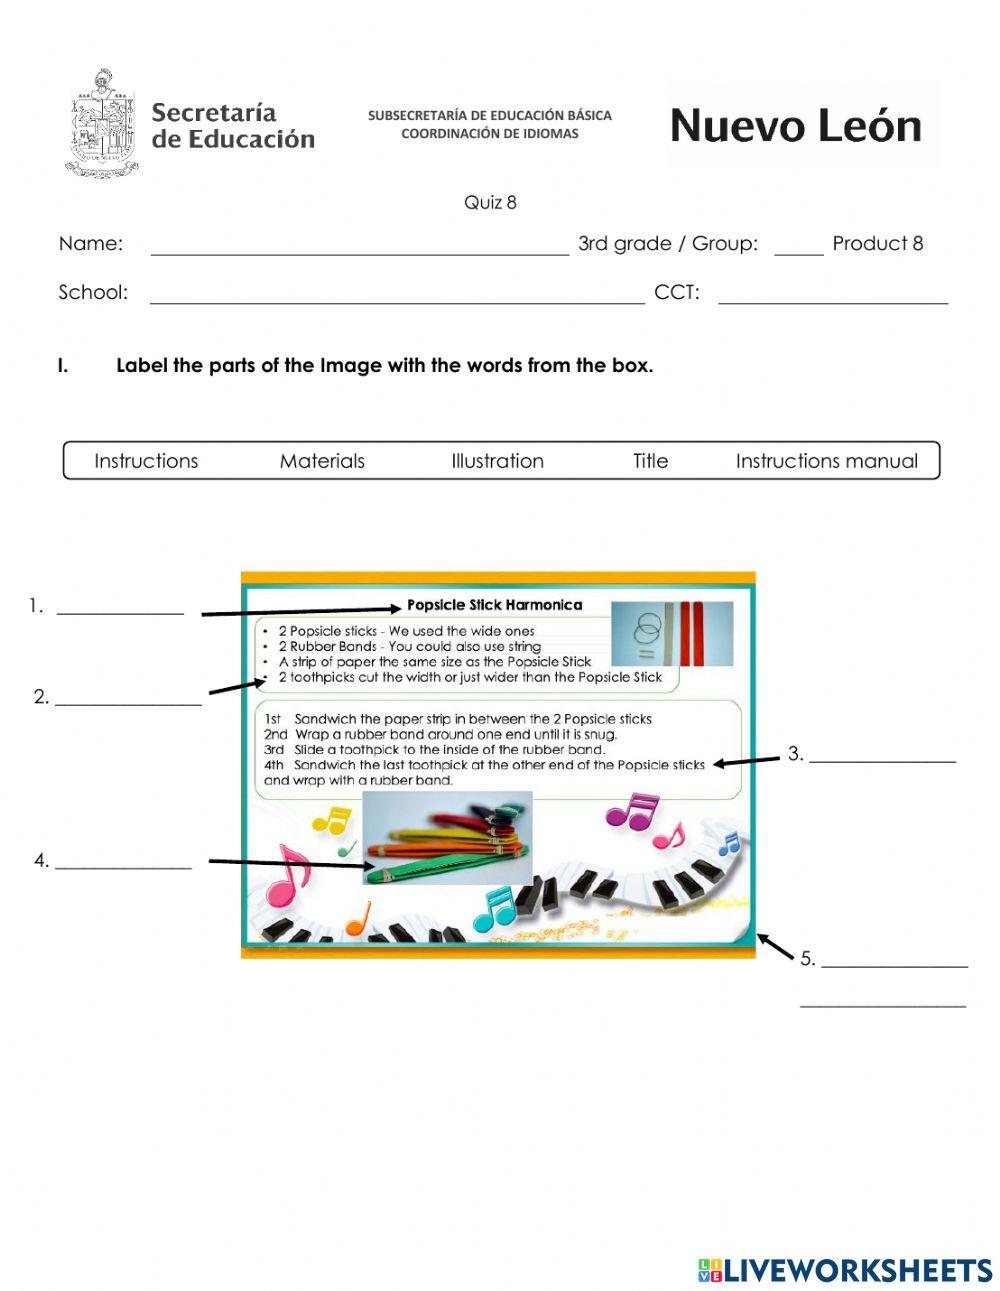 April Quiz - Third Grade - Instructions Manual to make an Object